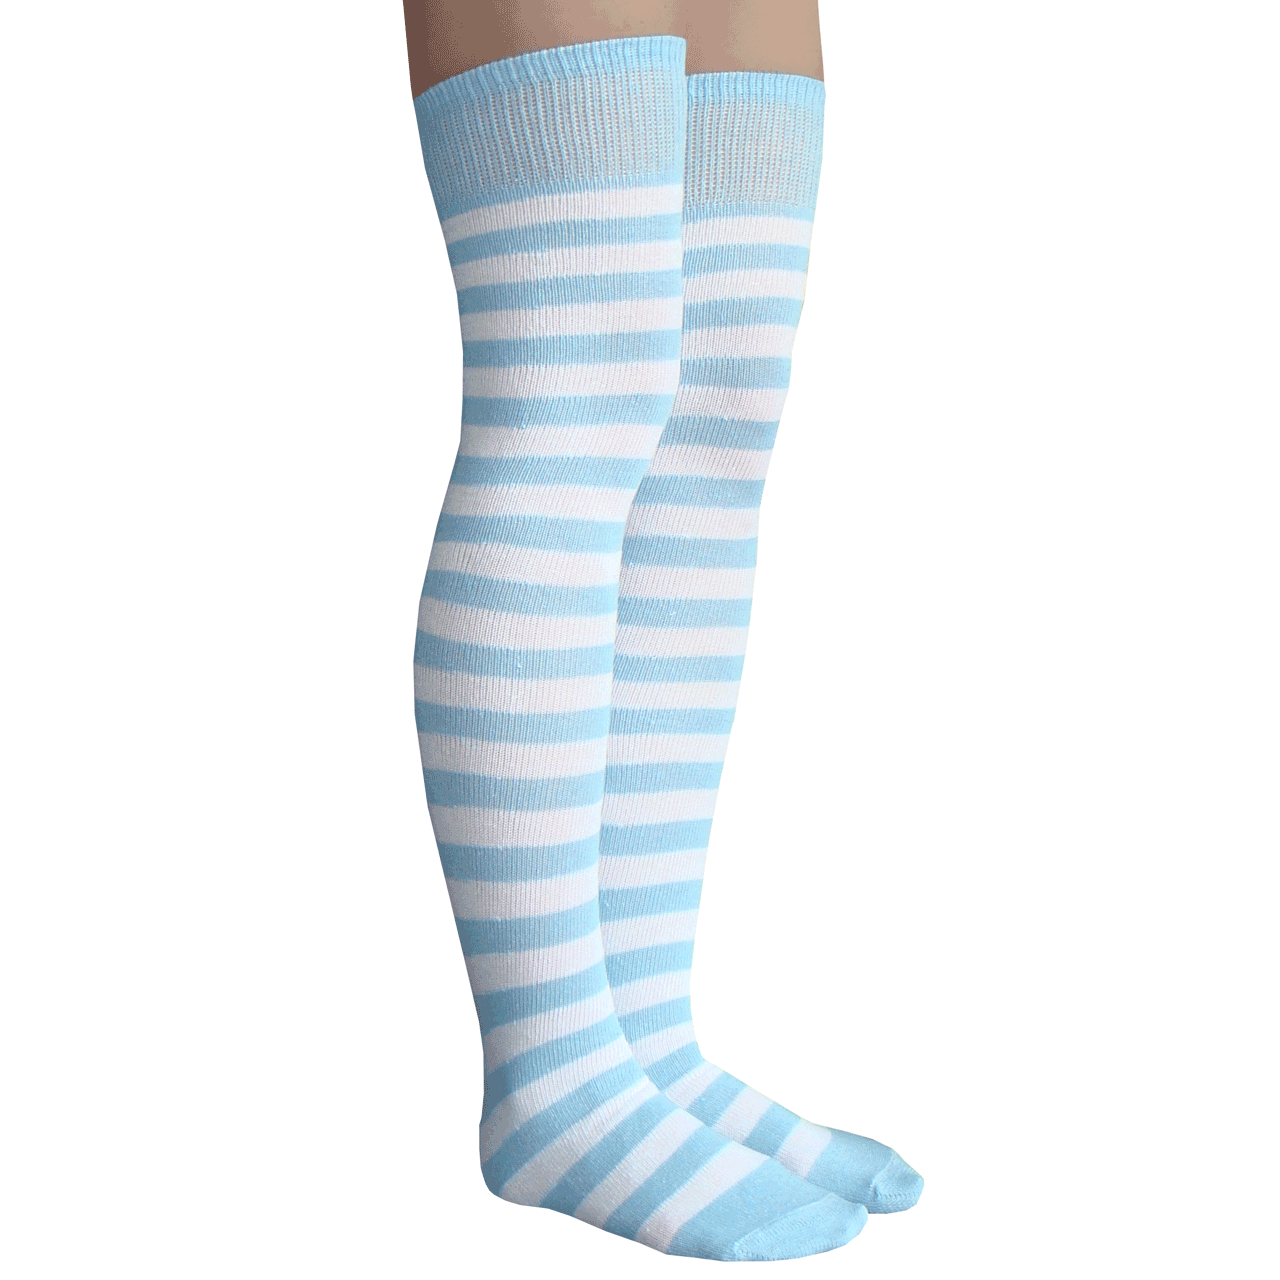 https://cdn11.bigcommerce.com/s-9k7zoiw/images/stencil/1280x1280/products/800/7121/blue-white-long-socks-765-1__02846__11752.1667493324.png?c=2